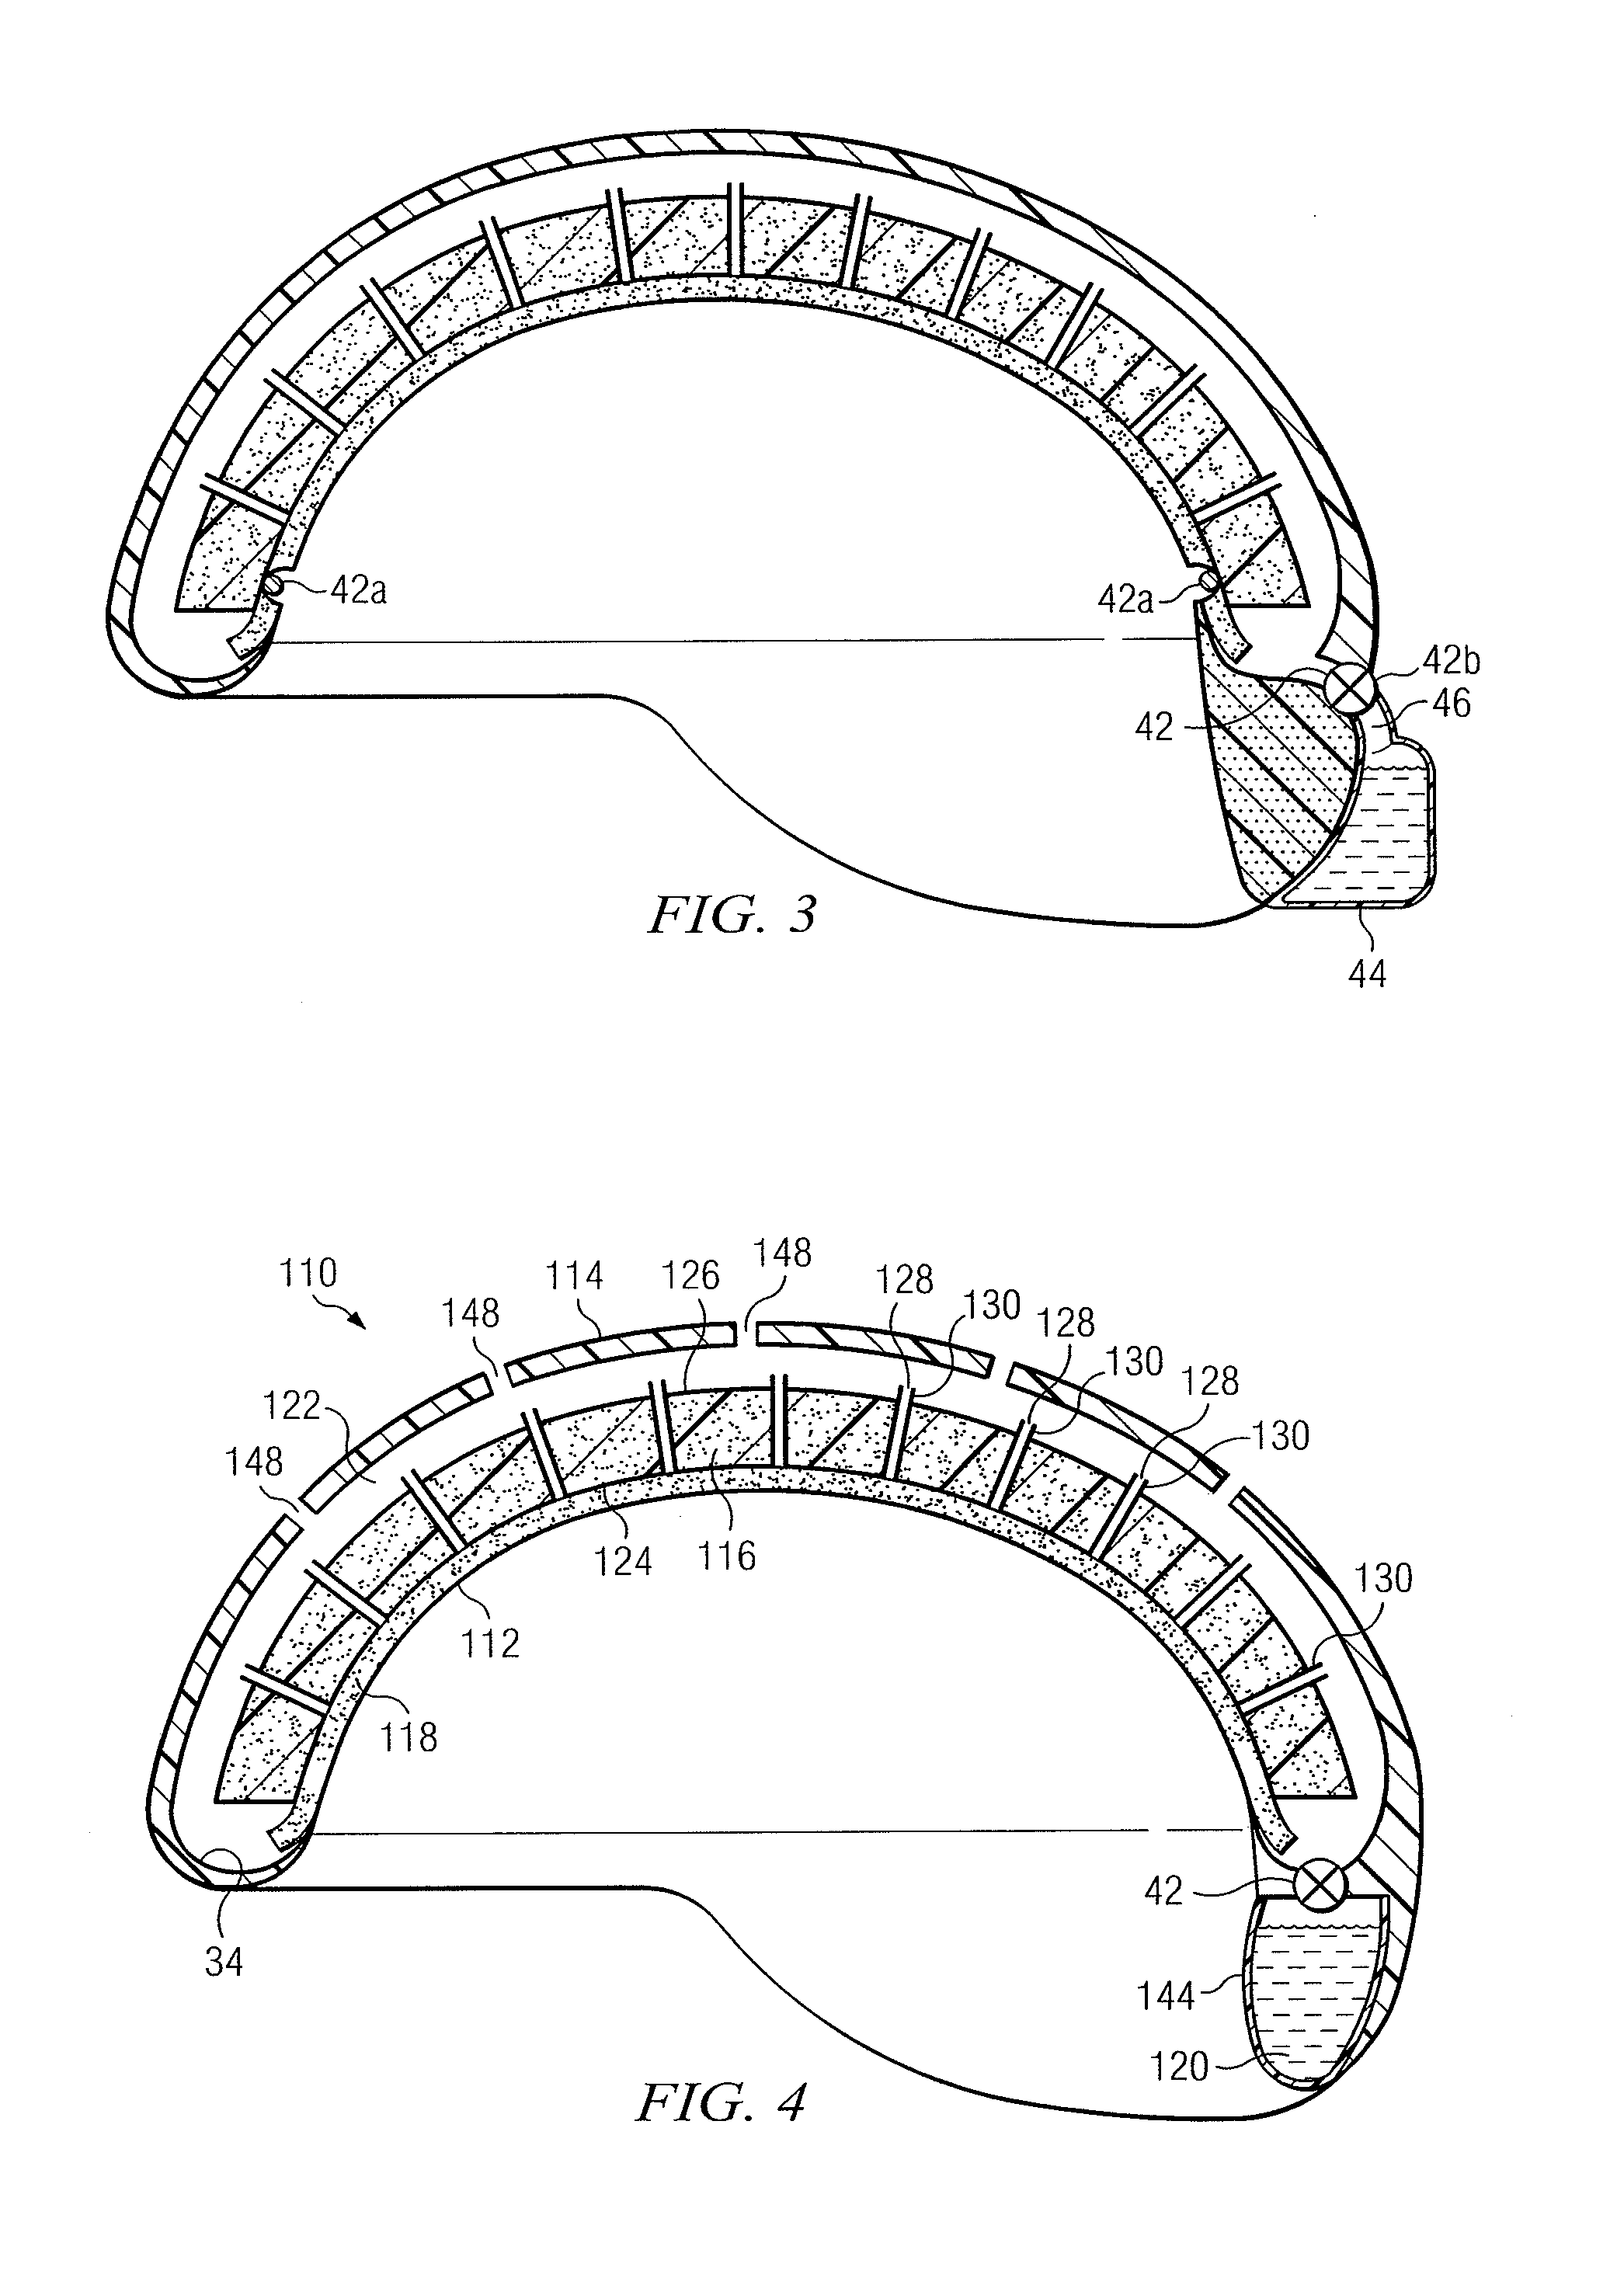 Apparatus and method for controlling temperature with a multimode heat pipe element